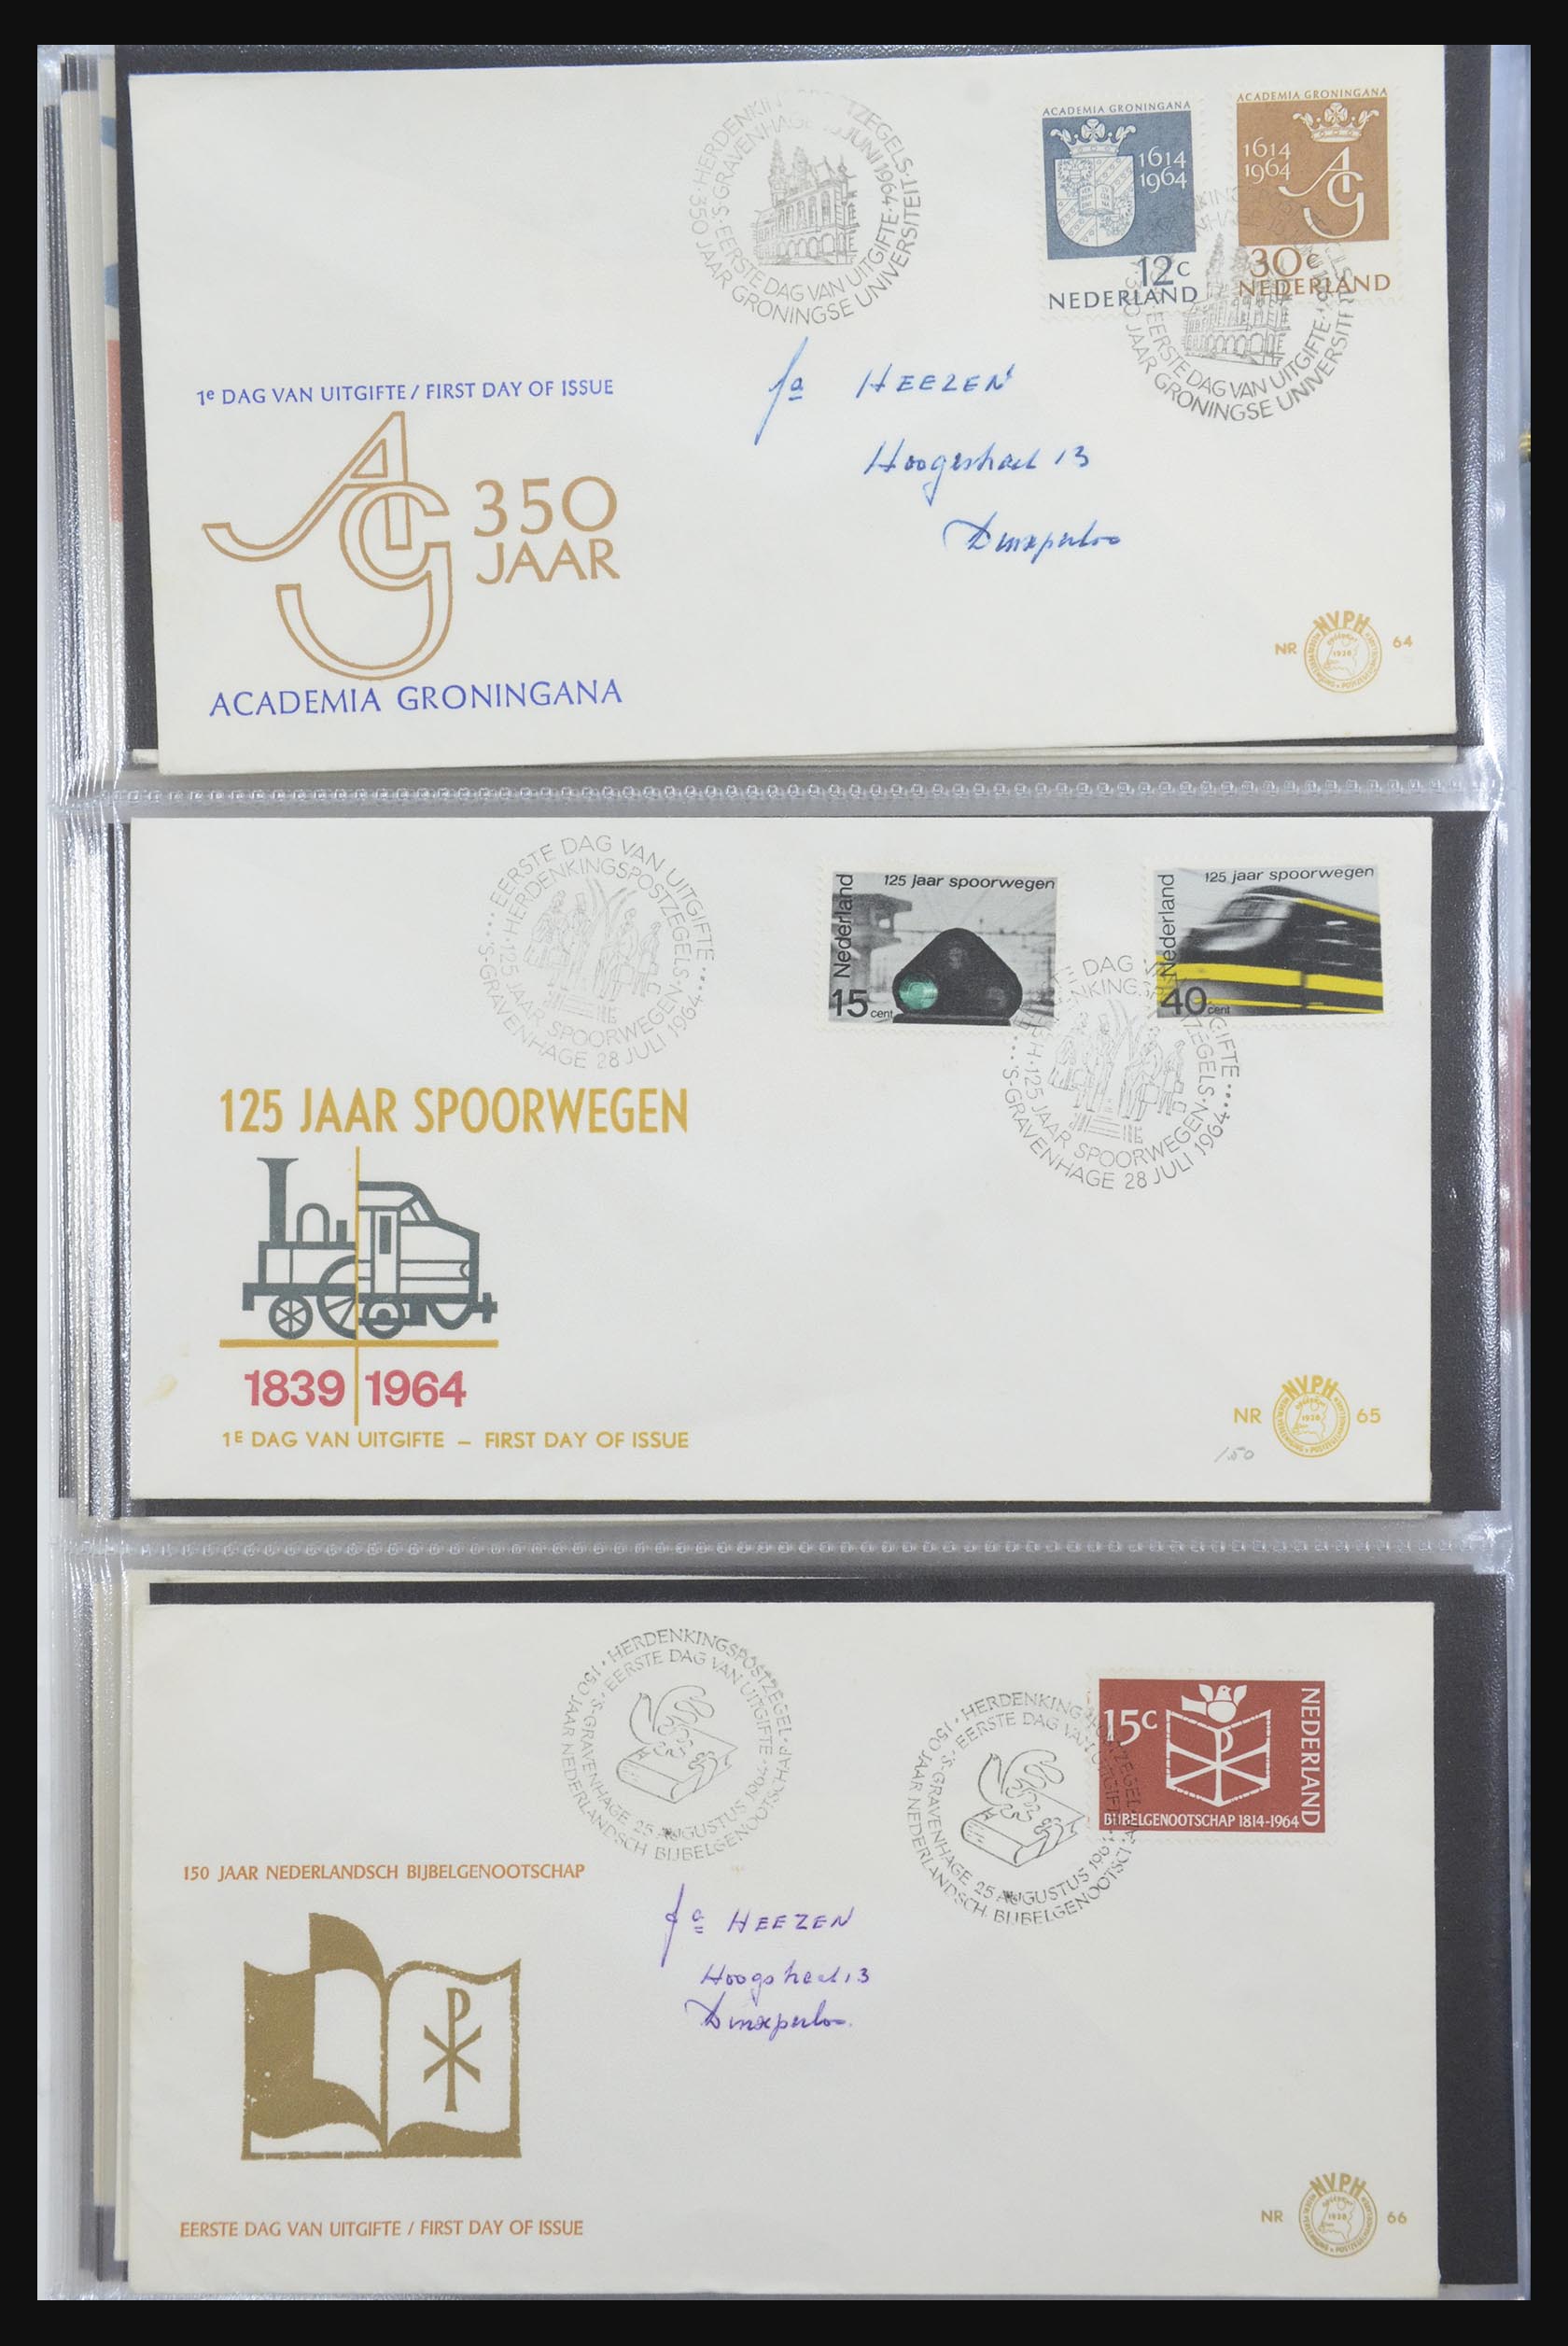 32170 019 - 32170 Netherlands FDC's 1953-2004.